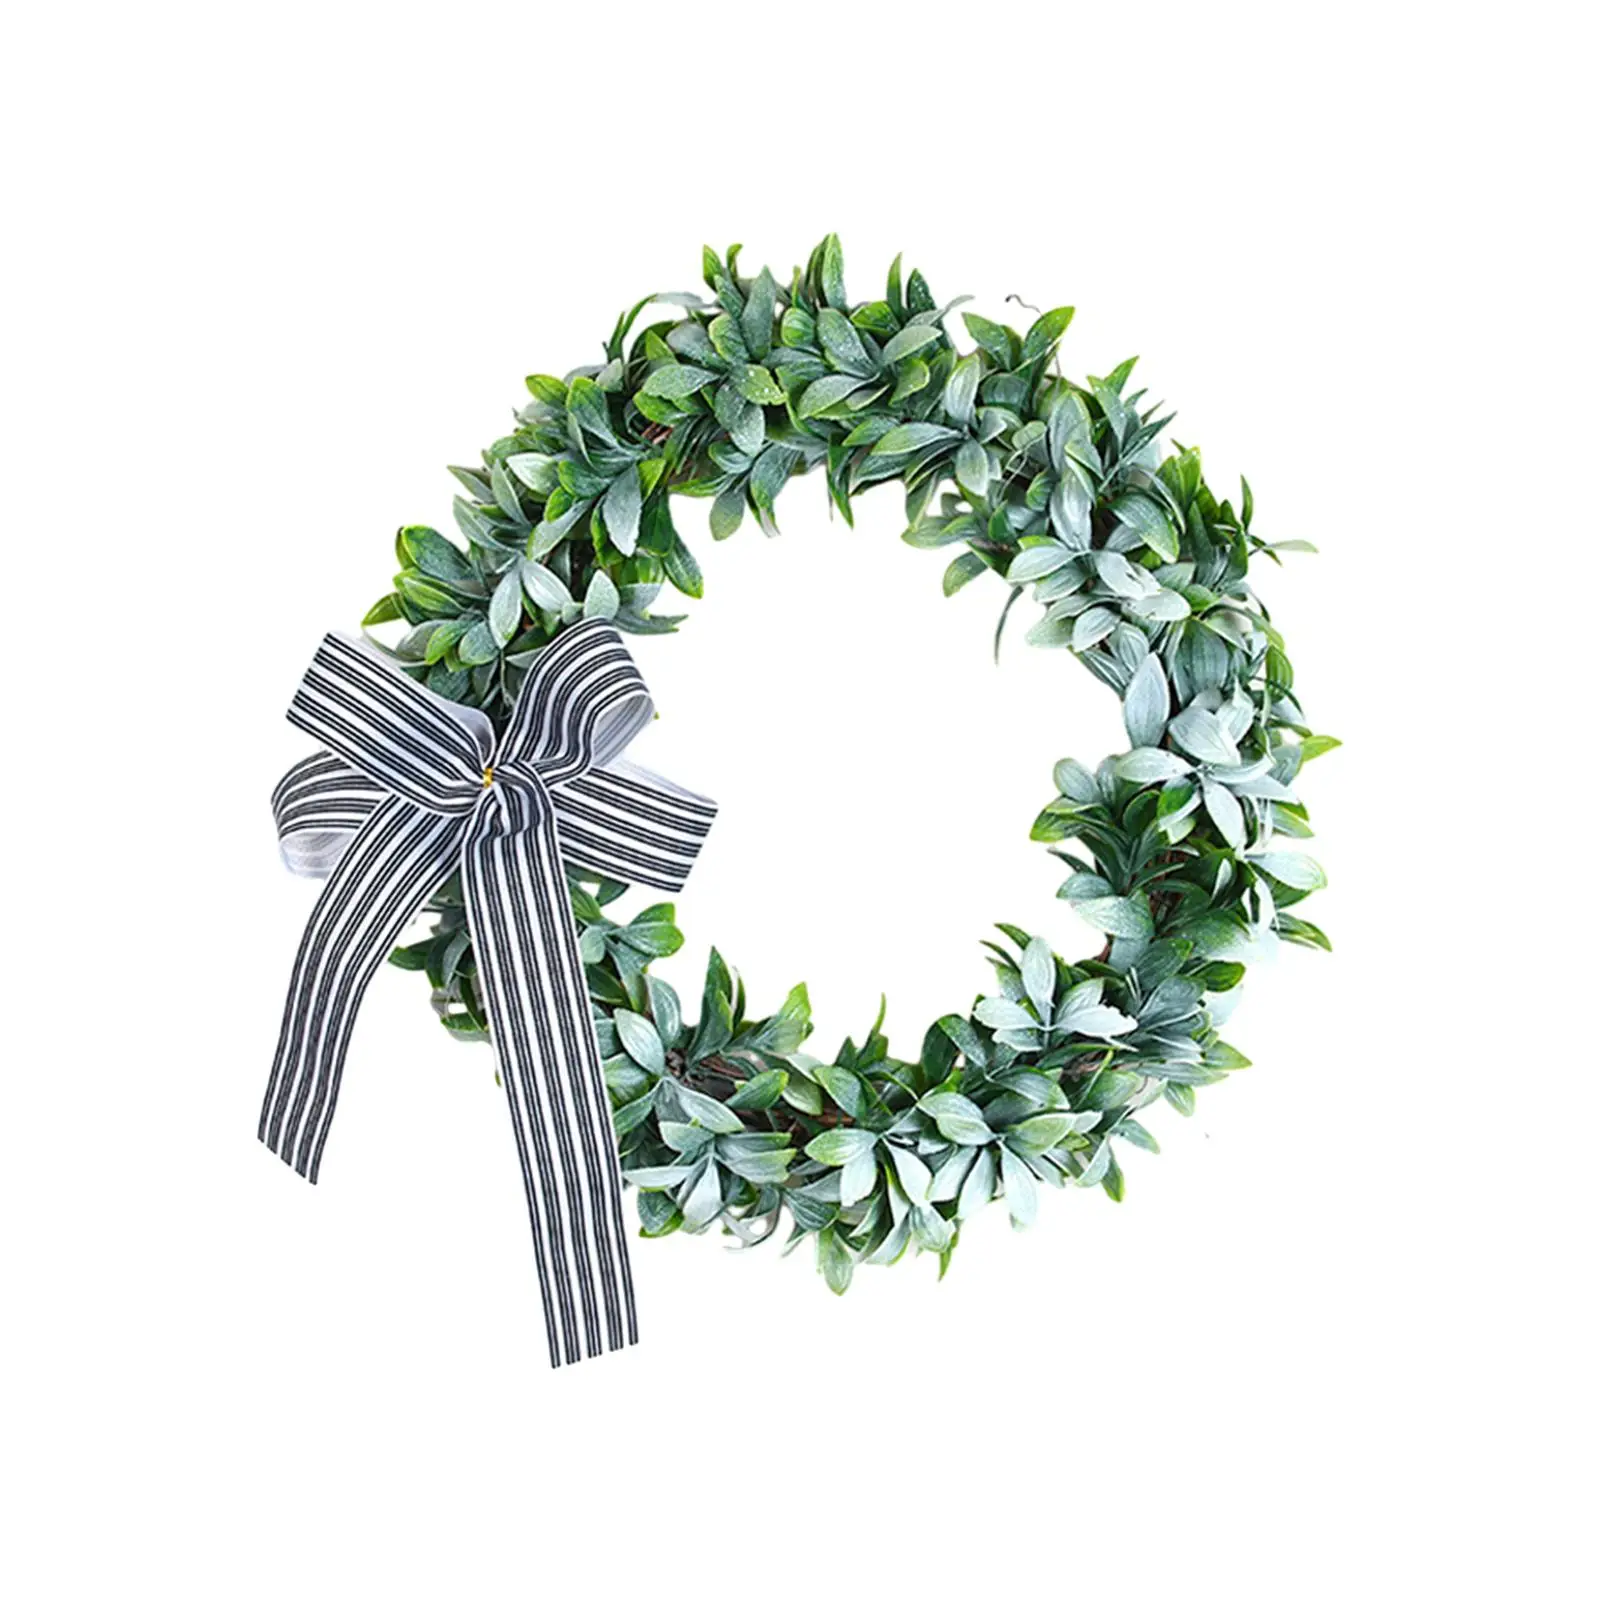 Artificial Green Leaves Wreath Realistic Texture Front Door Wreath for Farmhouse Wall Window Home Decoration Wedding Decor